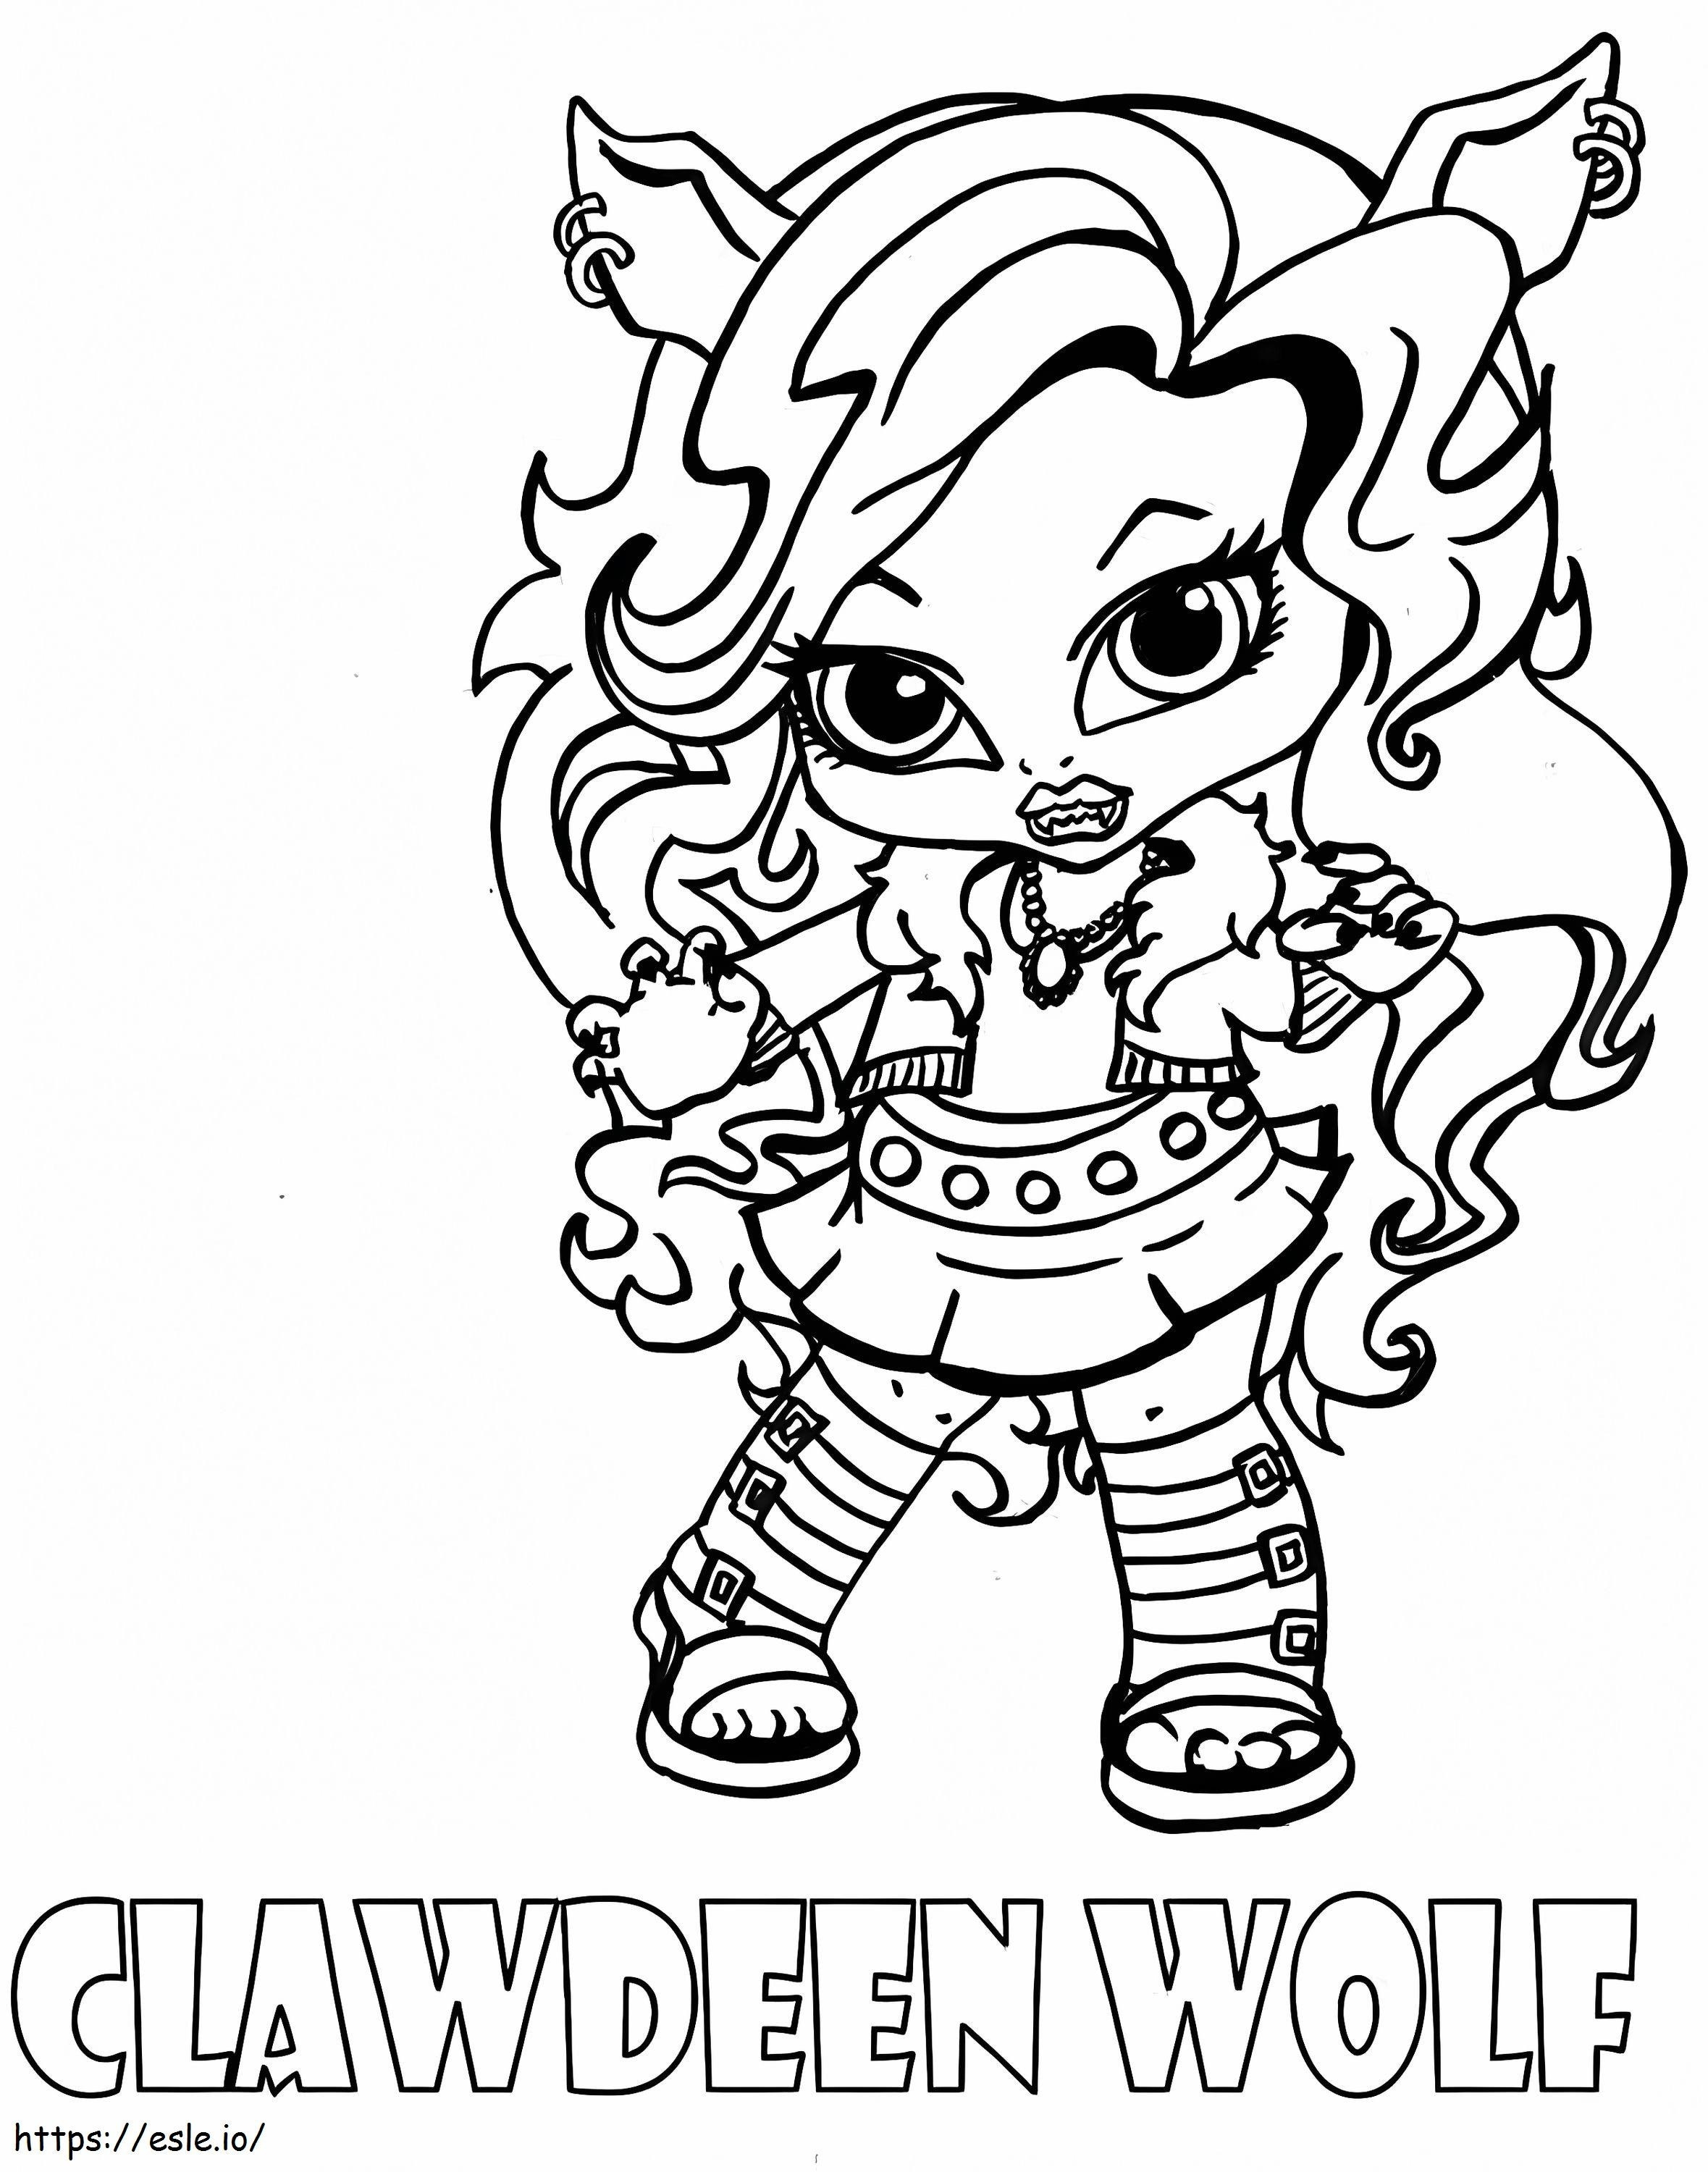 Clawdeen Wolf Girl coloring page